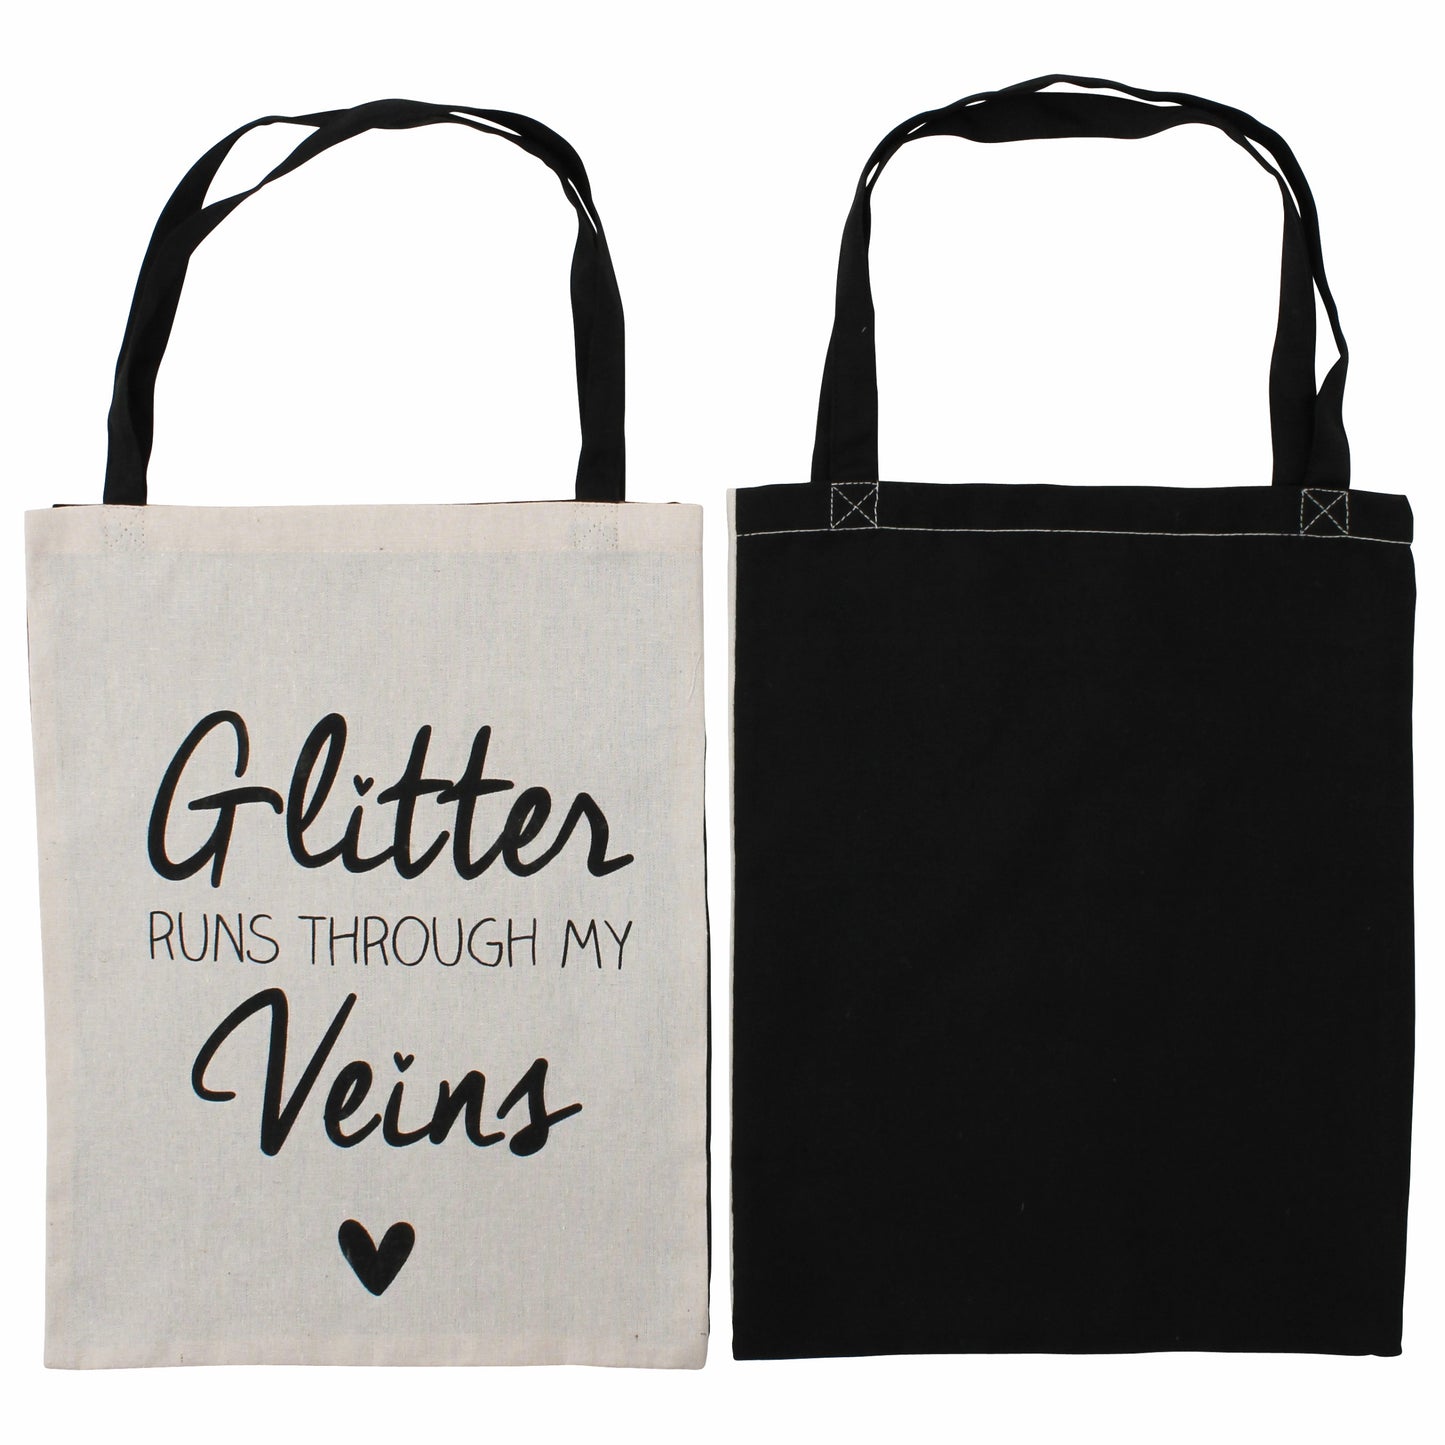 White canvas shopping bag featuring choice of slogans